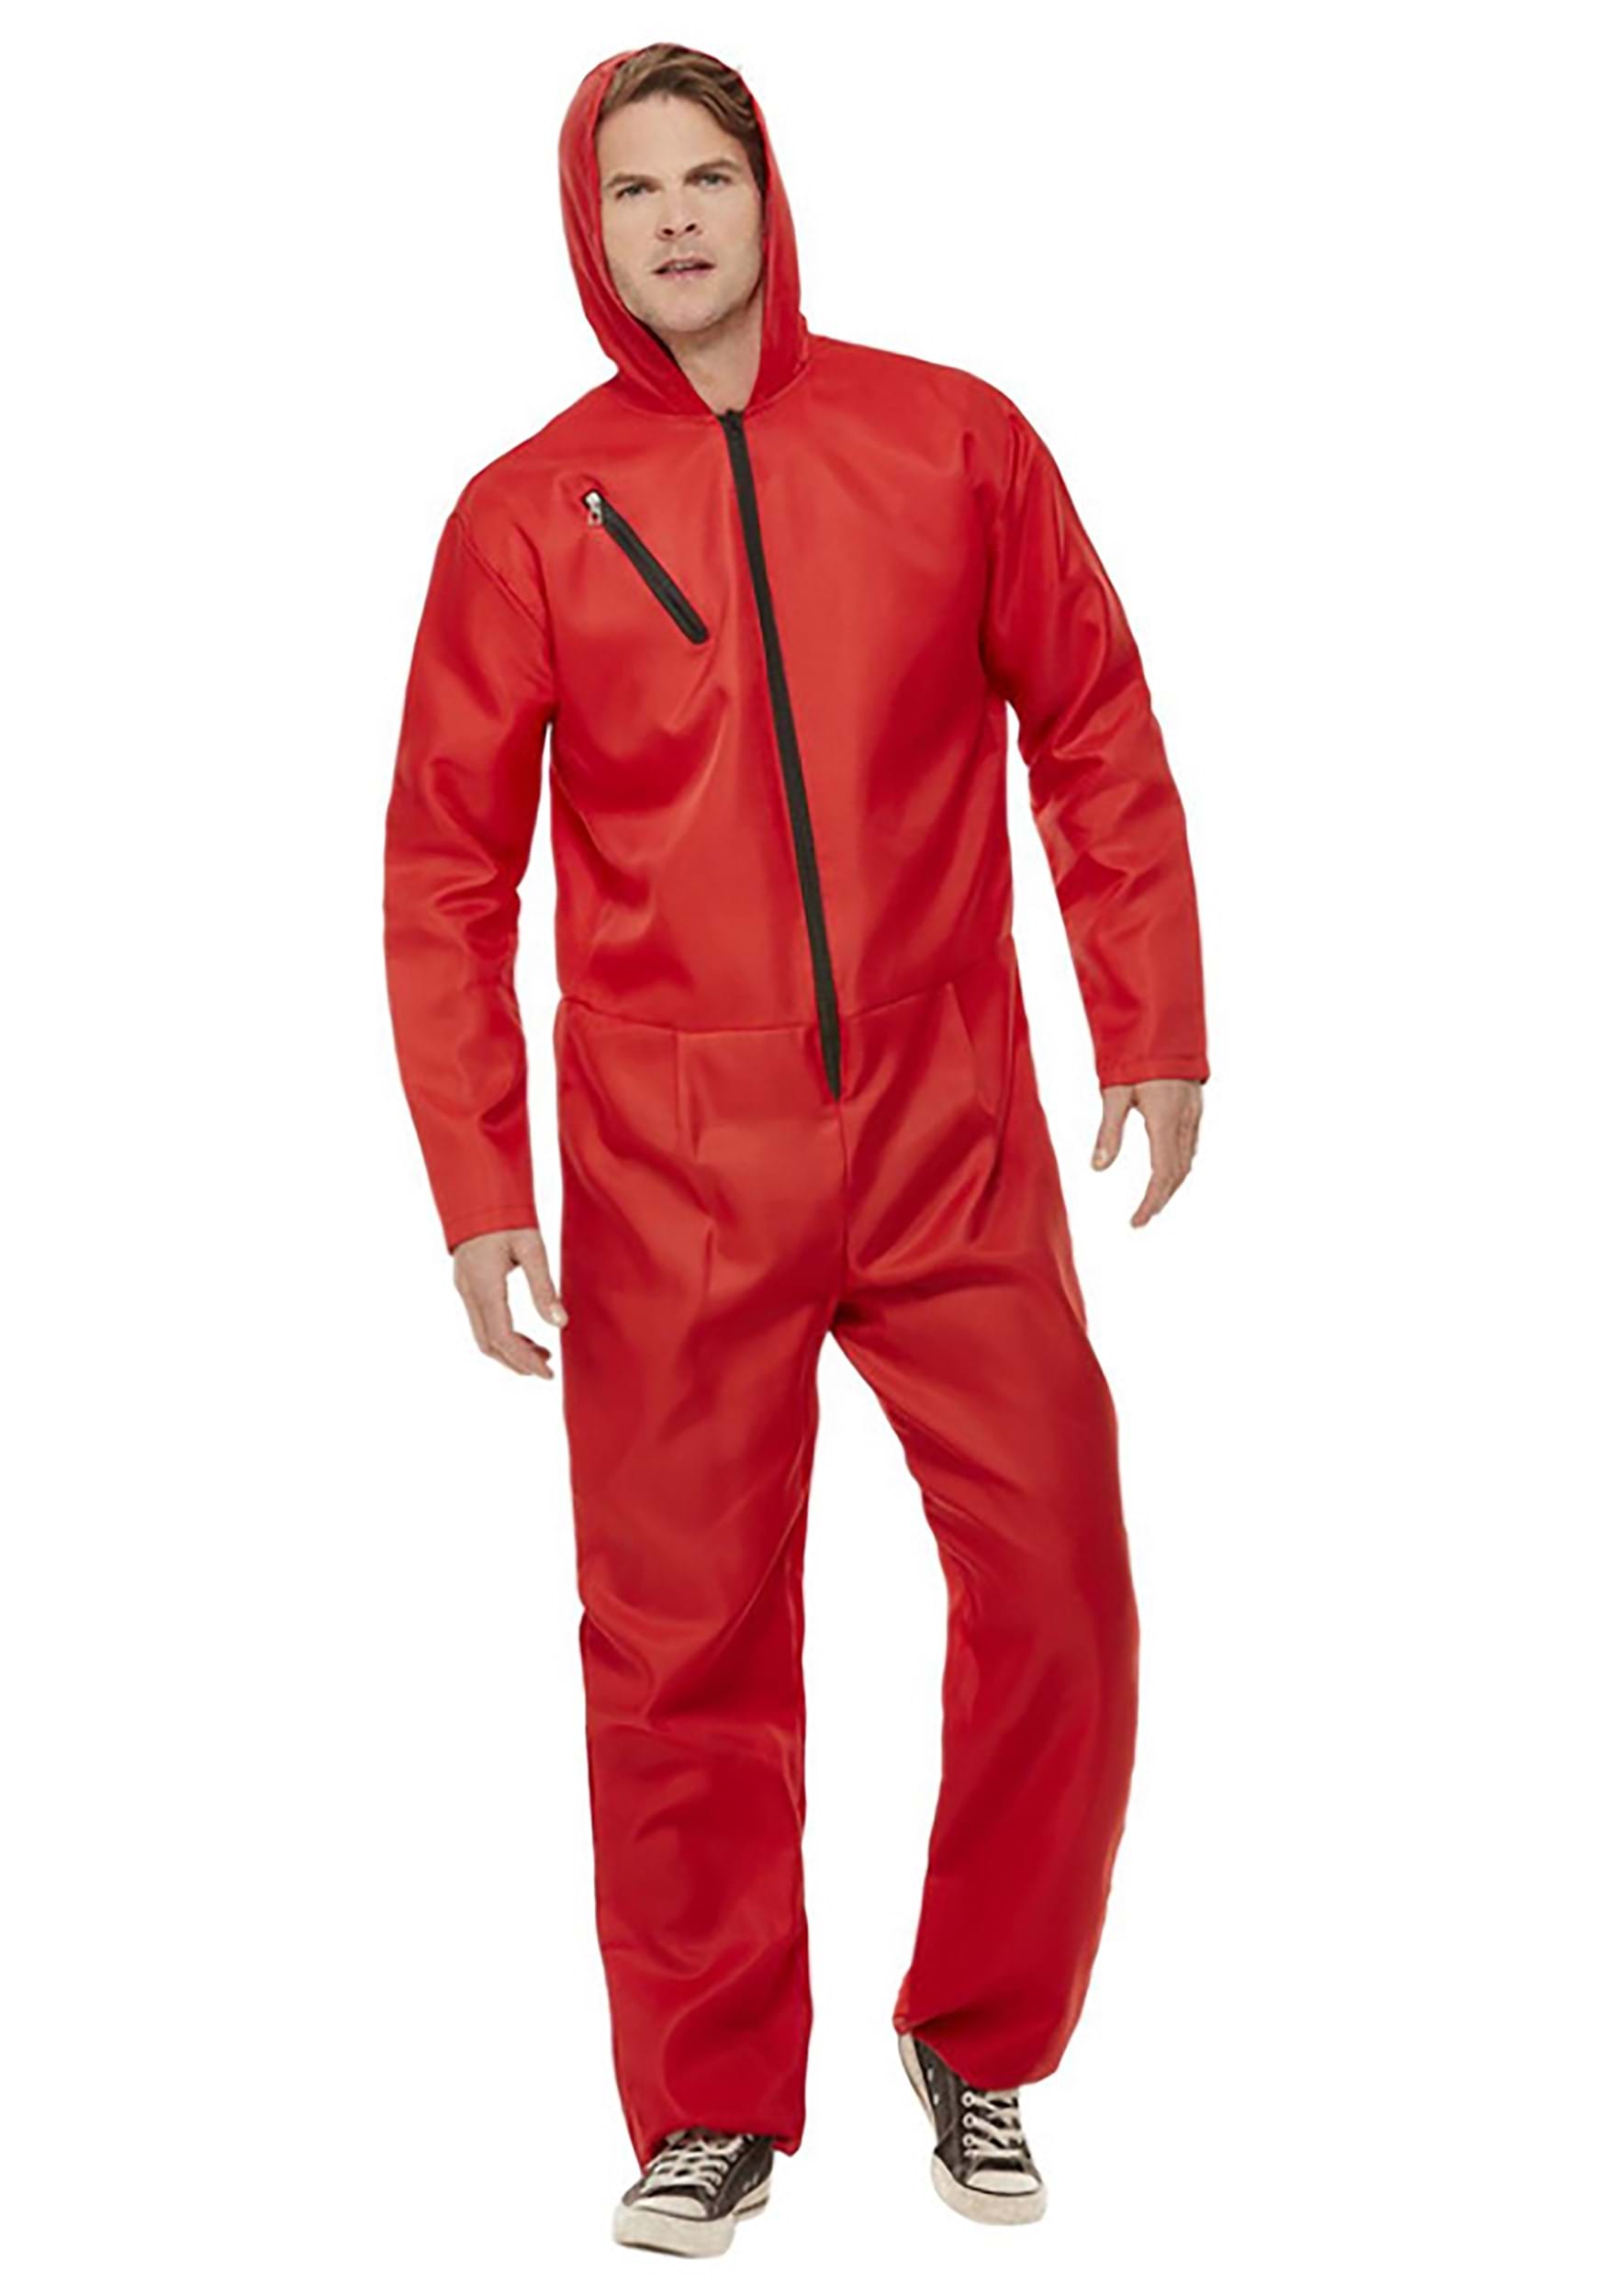 Adult Red Horror Jumpsuit 